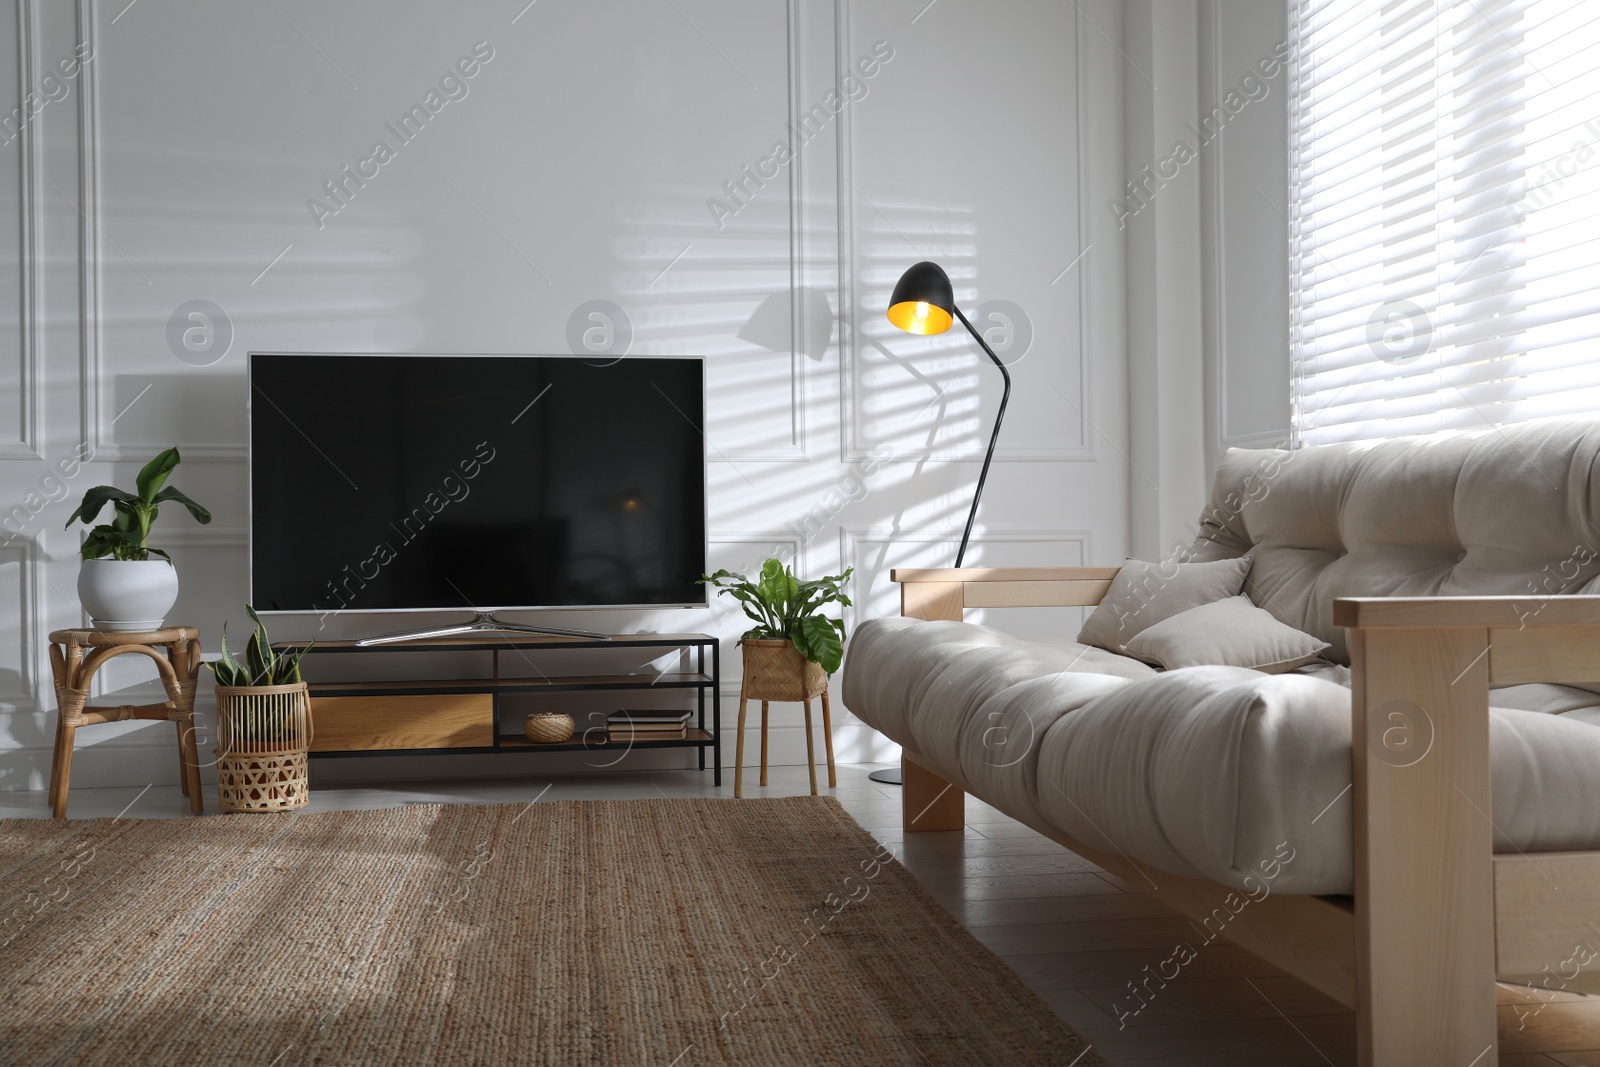 Photo of Living room interior with modern TV on stand